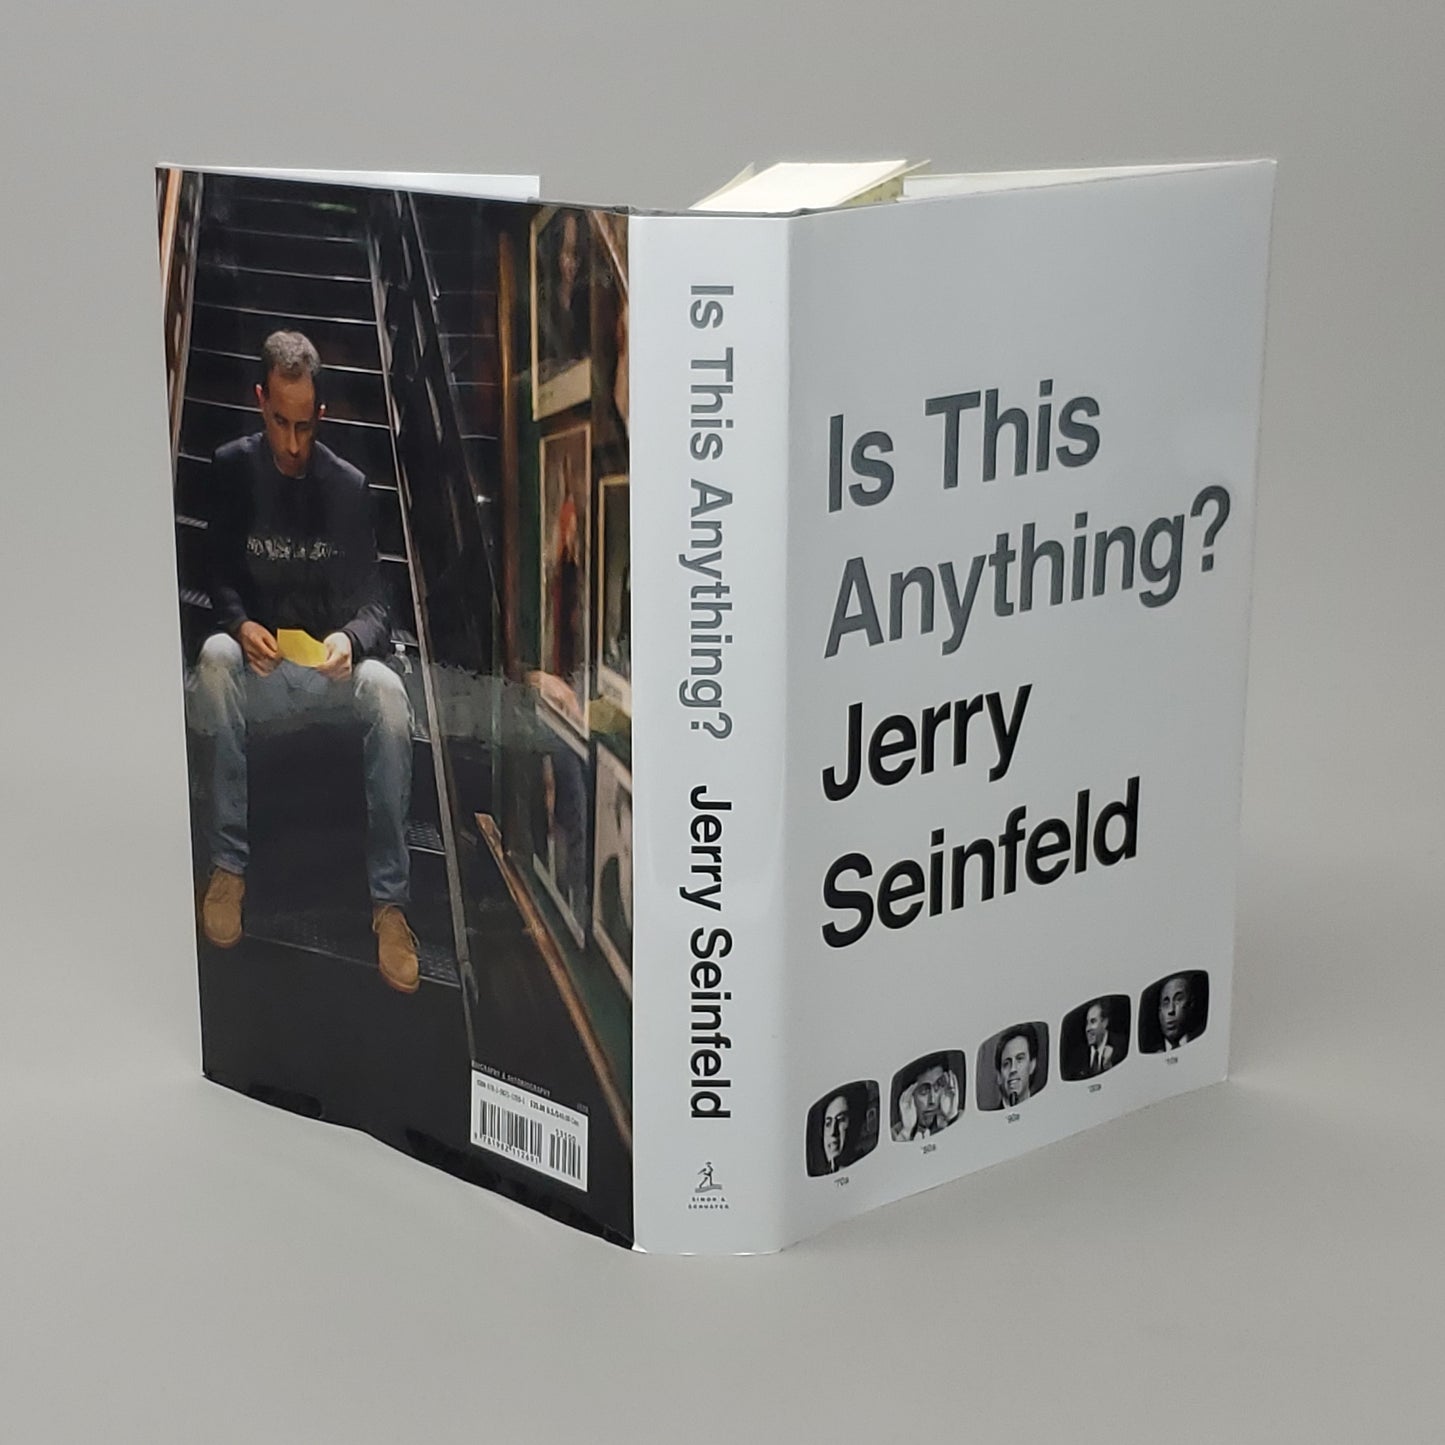 IS THIS ANYTHING? by Jerry Seinfeld Book Hardback (New Other)